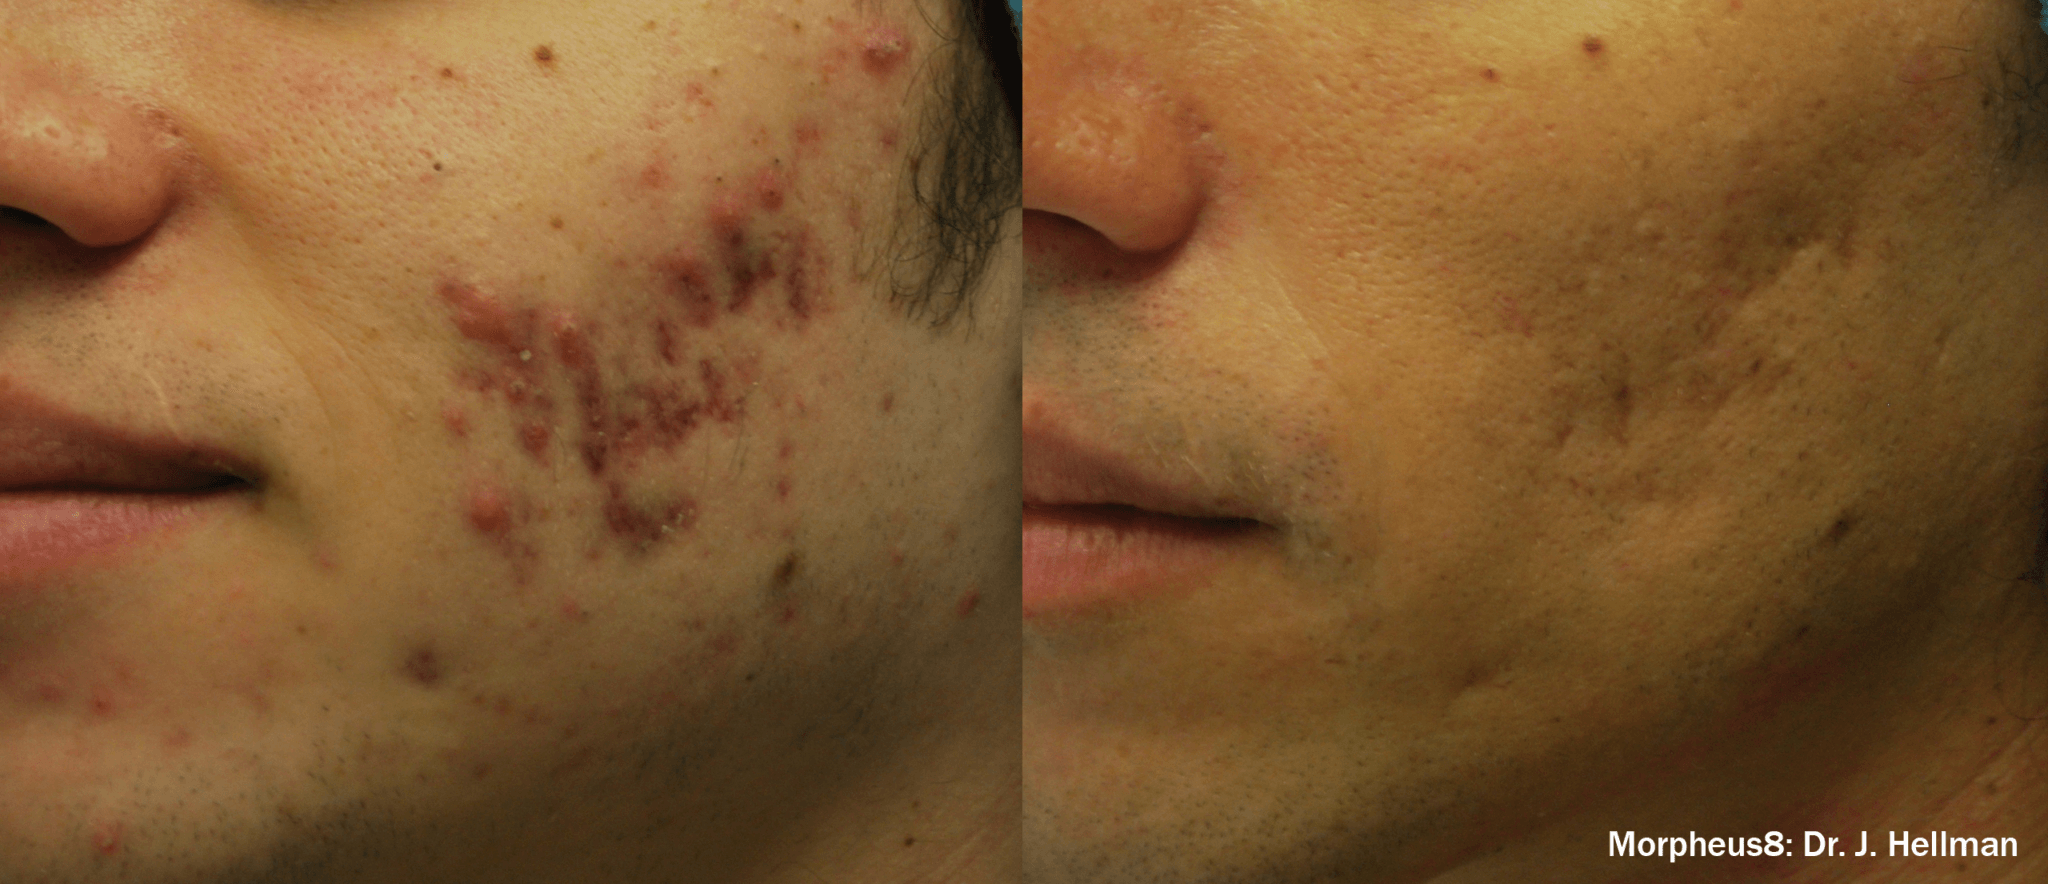 Before and After Image of Morpheus8 Treatment By GloDerma Aesthetics in Yardley, PA